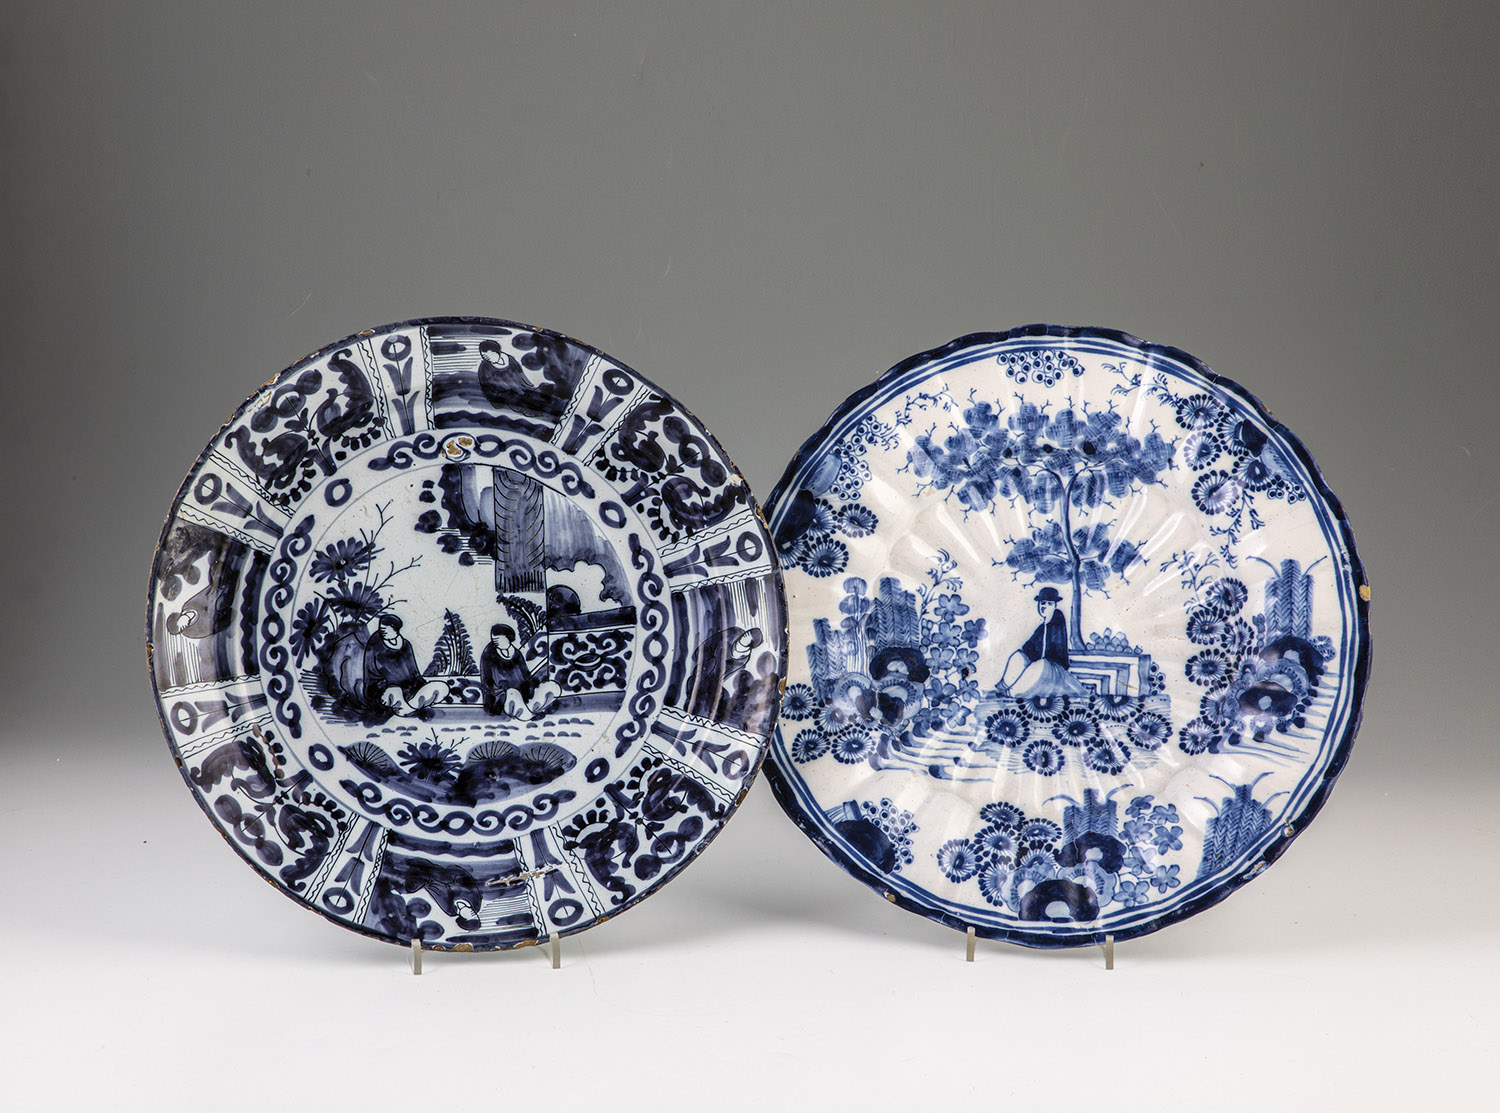 Fan and wide edge plate with chinoiserie